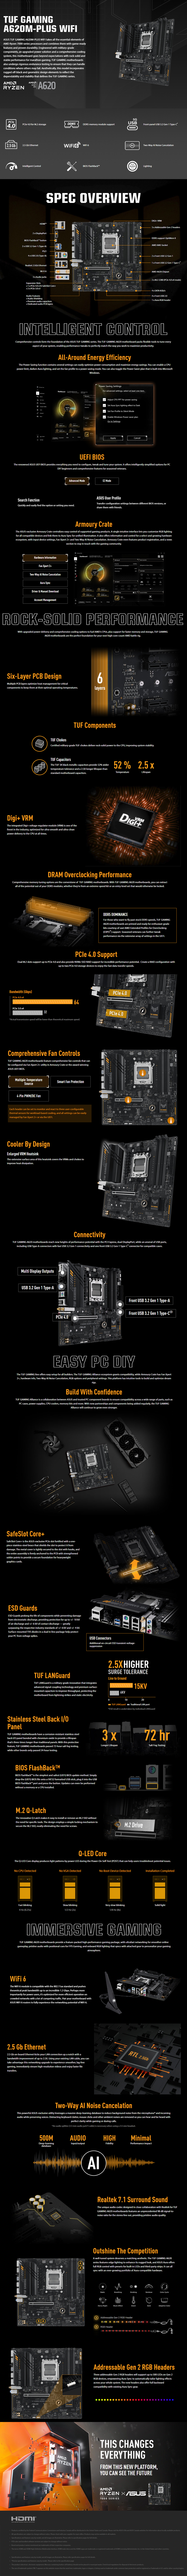 A large marketing image providing additional information about the product ASUS TUF Gaming A620M-Plus AM5 WiFi mATX Desktop Motherboard - Additional alt info not provided